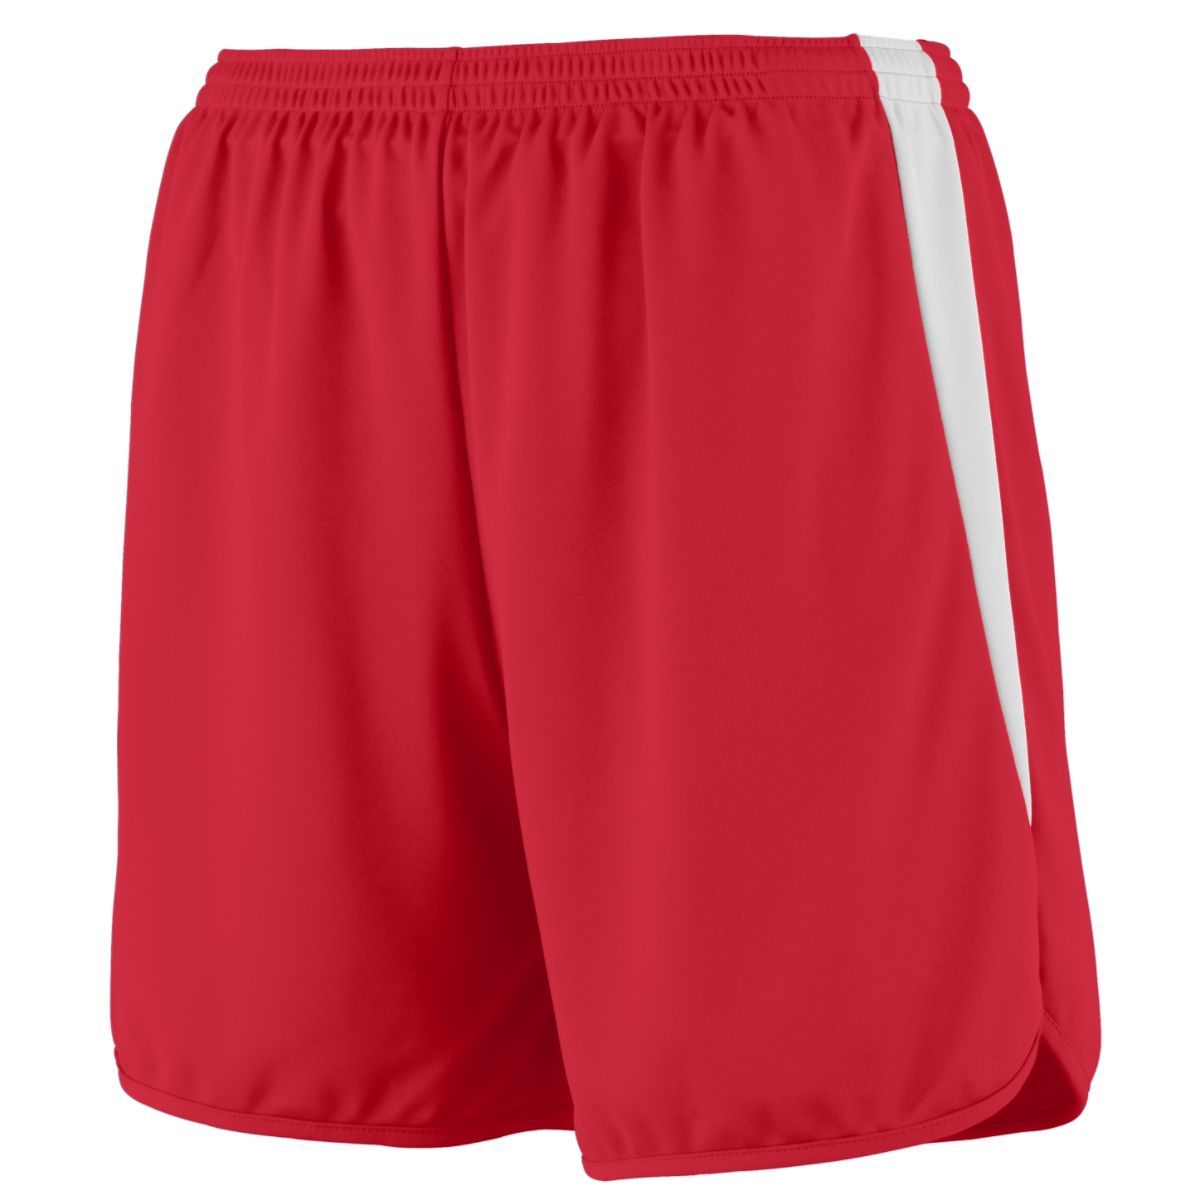 Augusta Sportswear Youth Rapidpace Track Shorts in Red/White  -Part of the Youth, Youth-Shorts, Augusta-Products, Track-Field product lines at KanaleyCreations.com